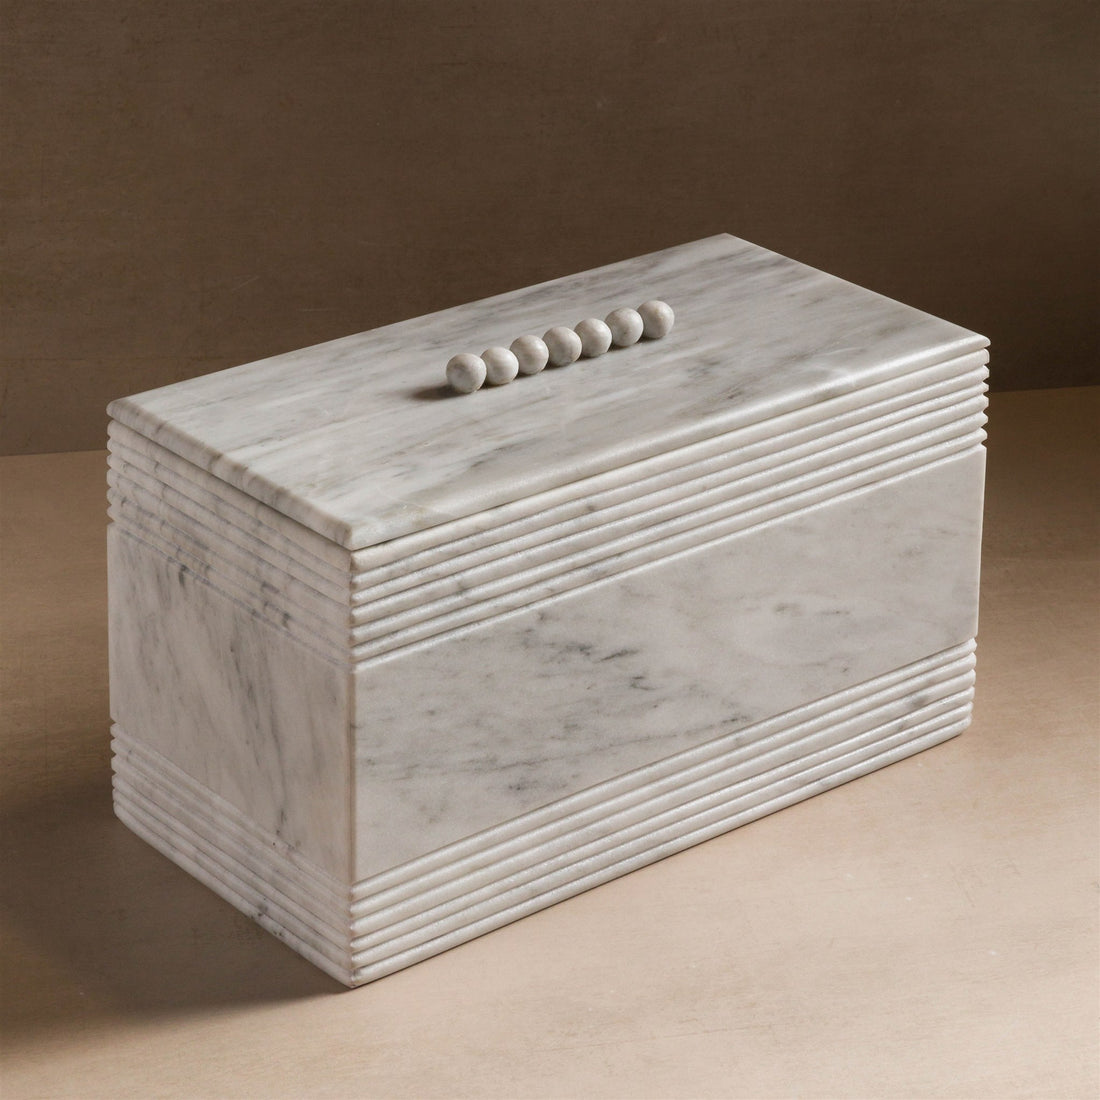 Studio H Collection Jonah Rectangular Stone Box with Ribbing and Ball Detail Lid - White Marble